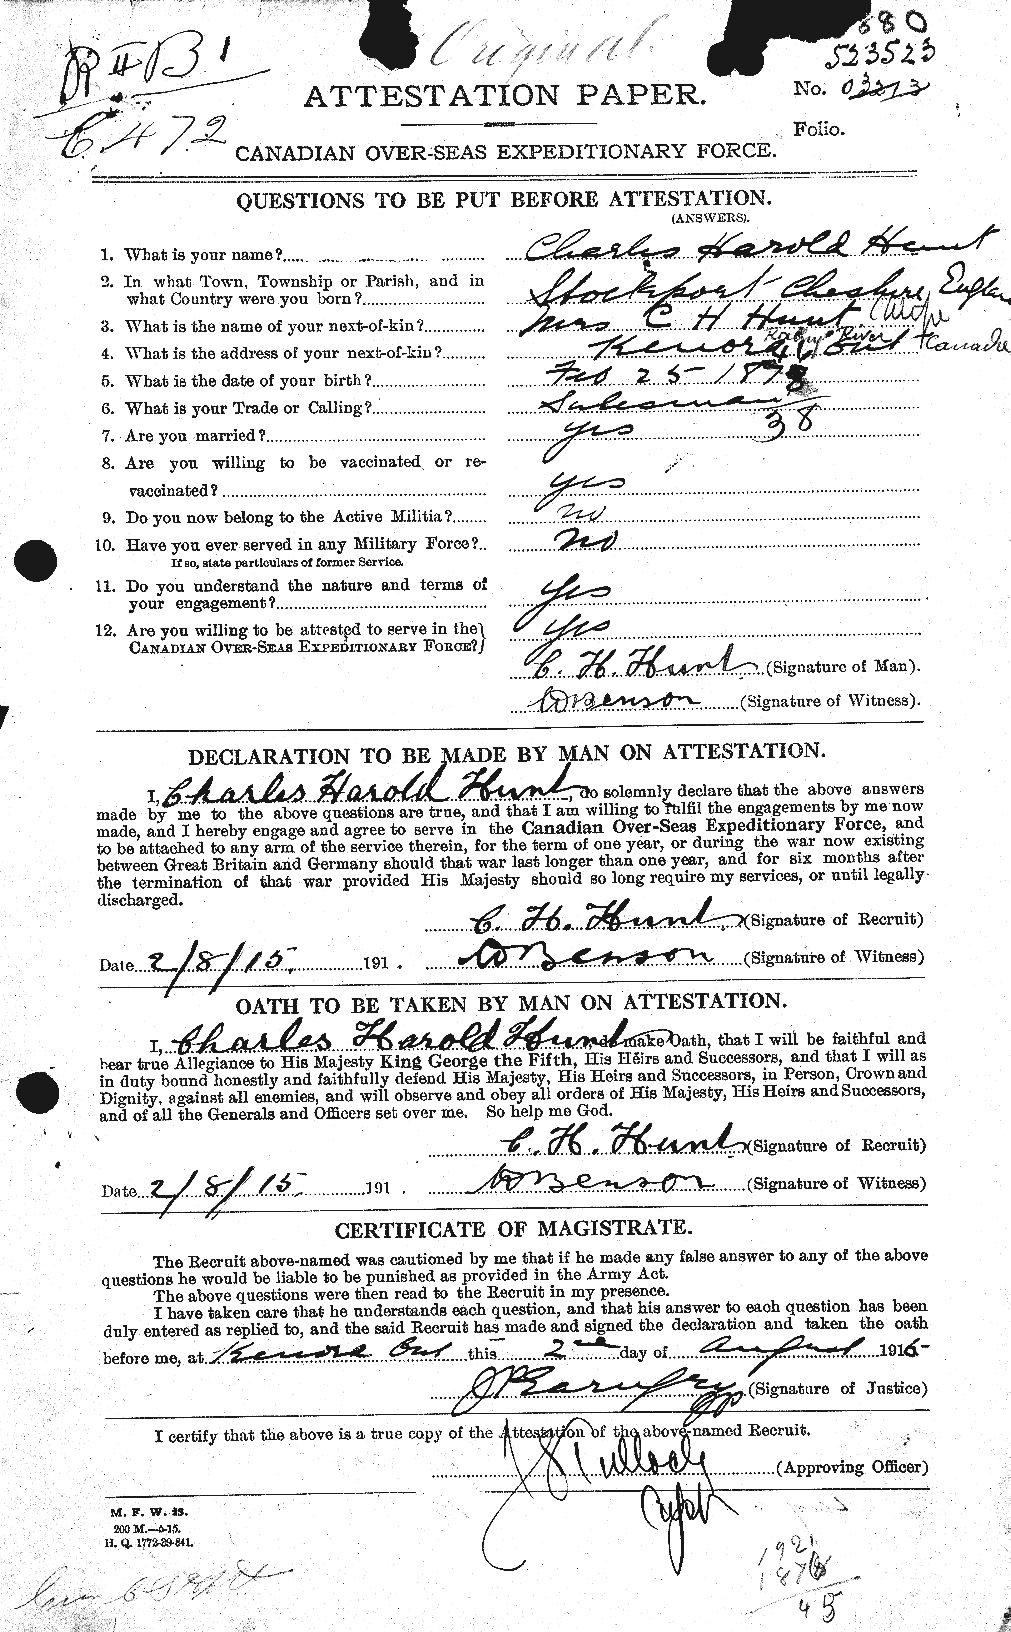 Personnel Records of the First World War - CEF 406810a